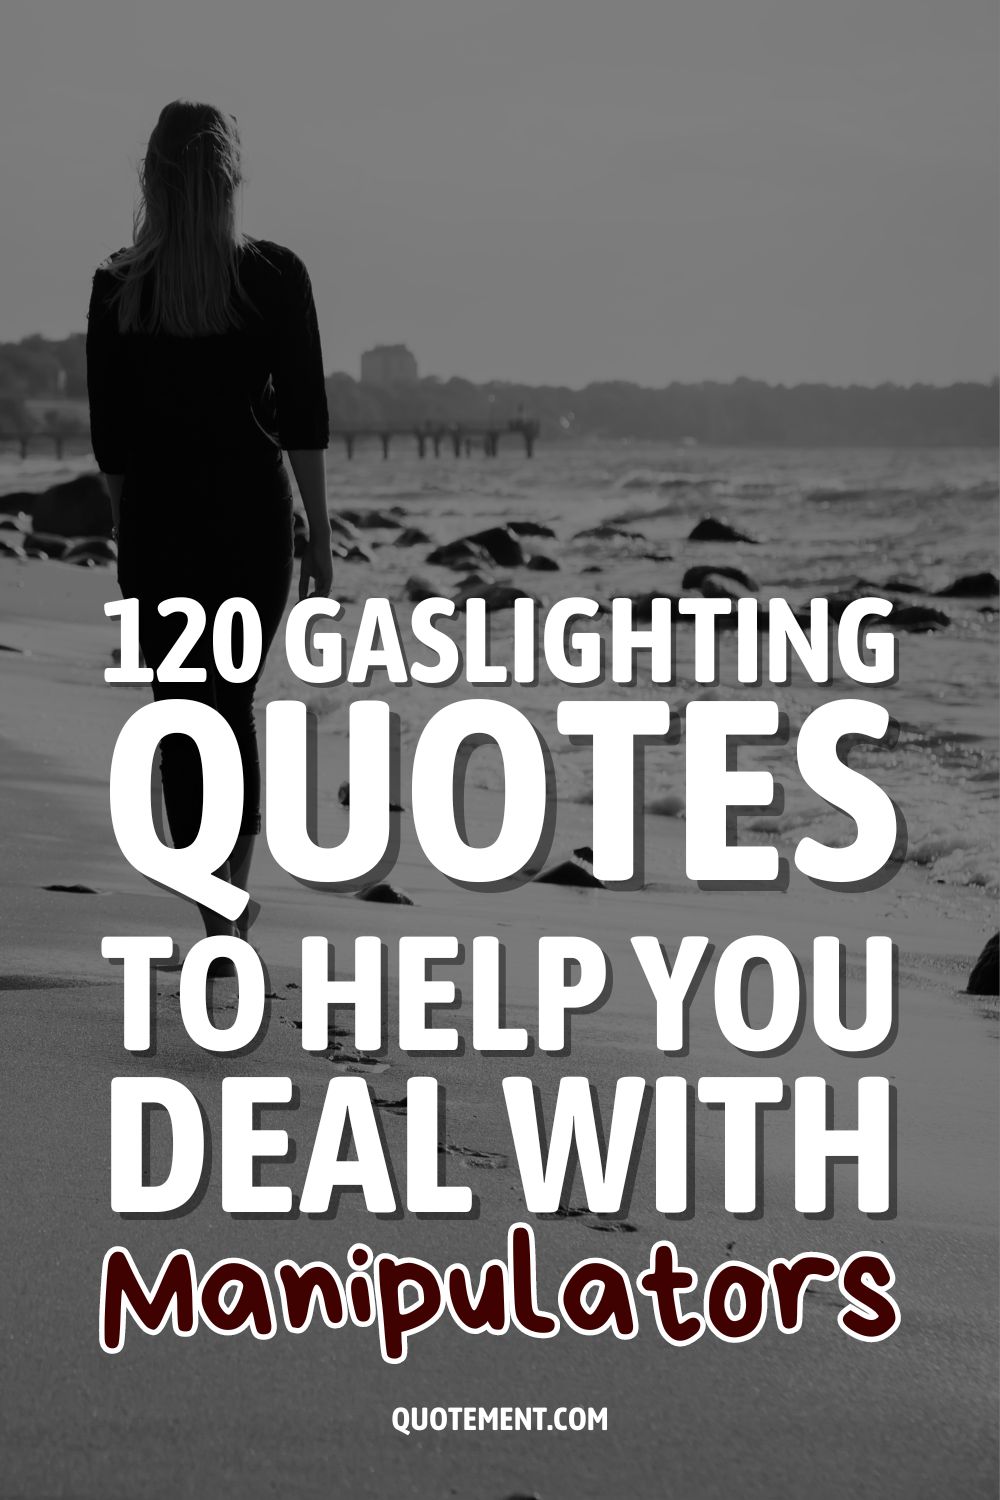 120 Gaslighting Quotes To Help You Deal With Manipulators 